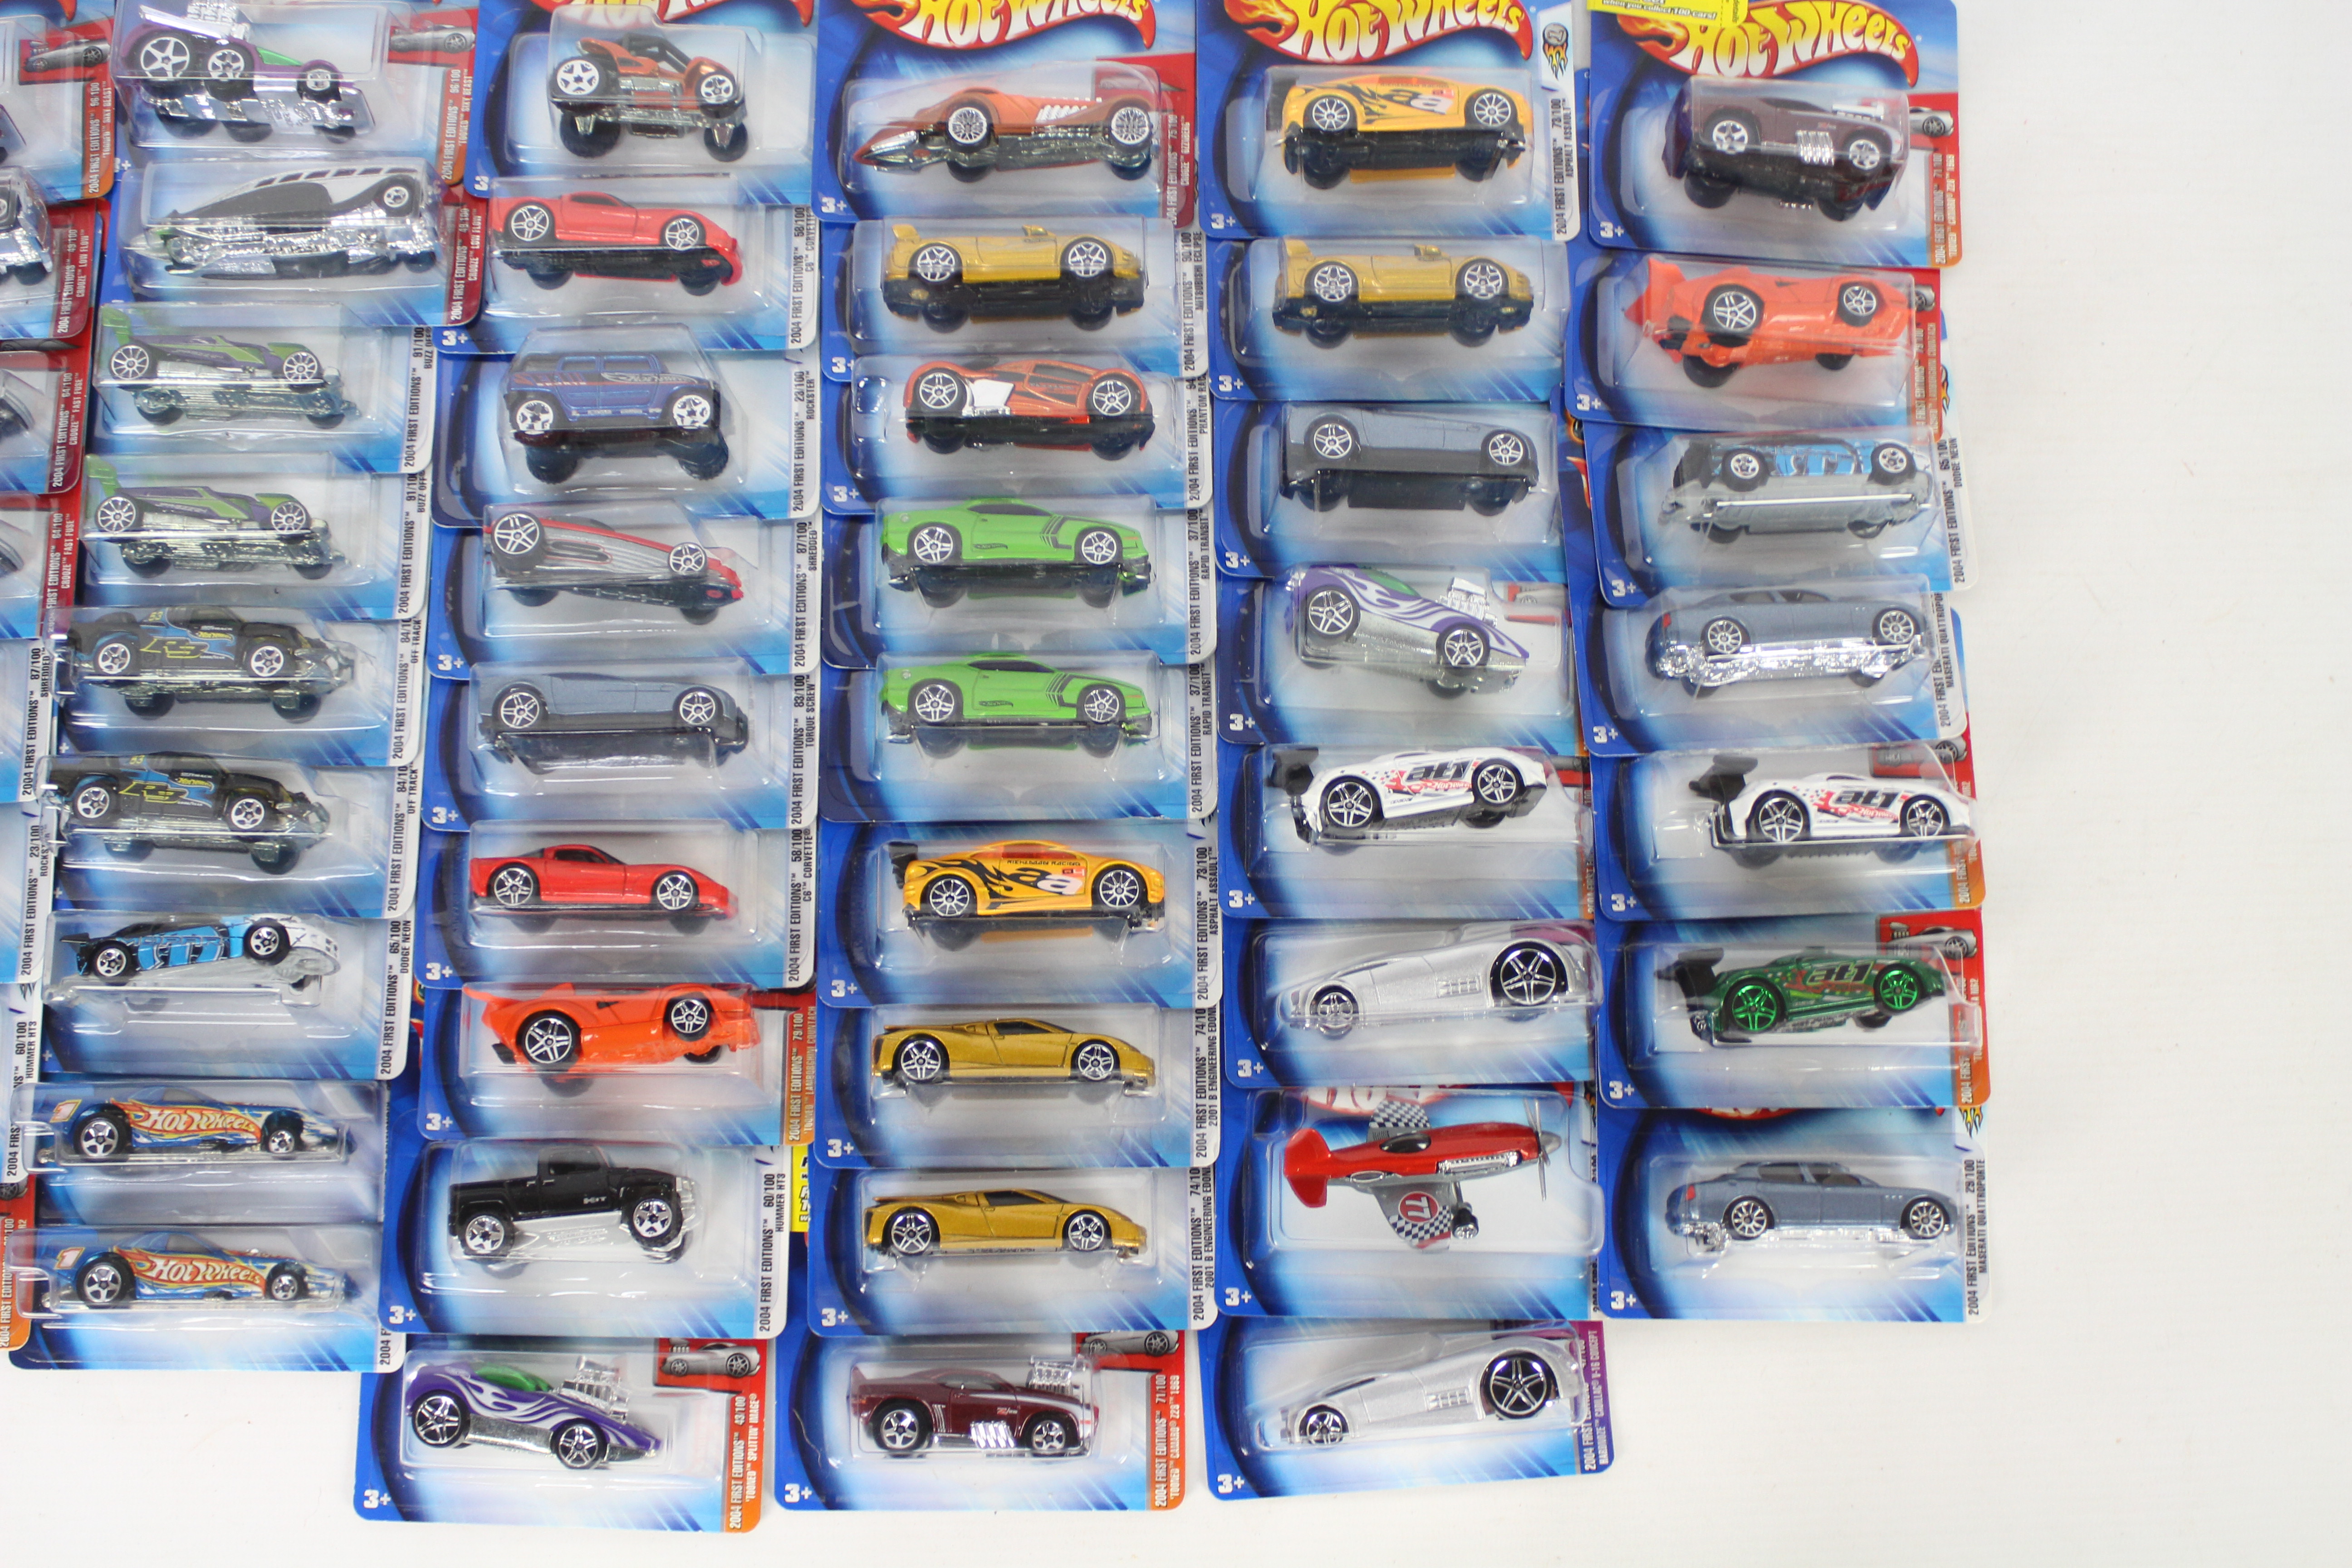 Hot Wheels - 50 x unopened carded models from the early 2000s including the Hot 100 series, - Image 2 of 3